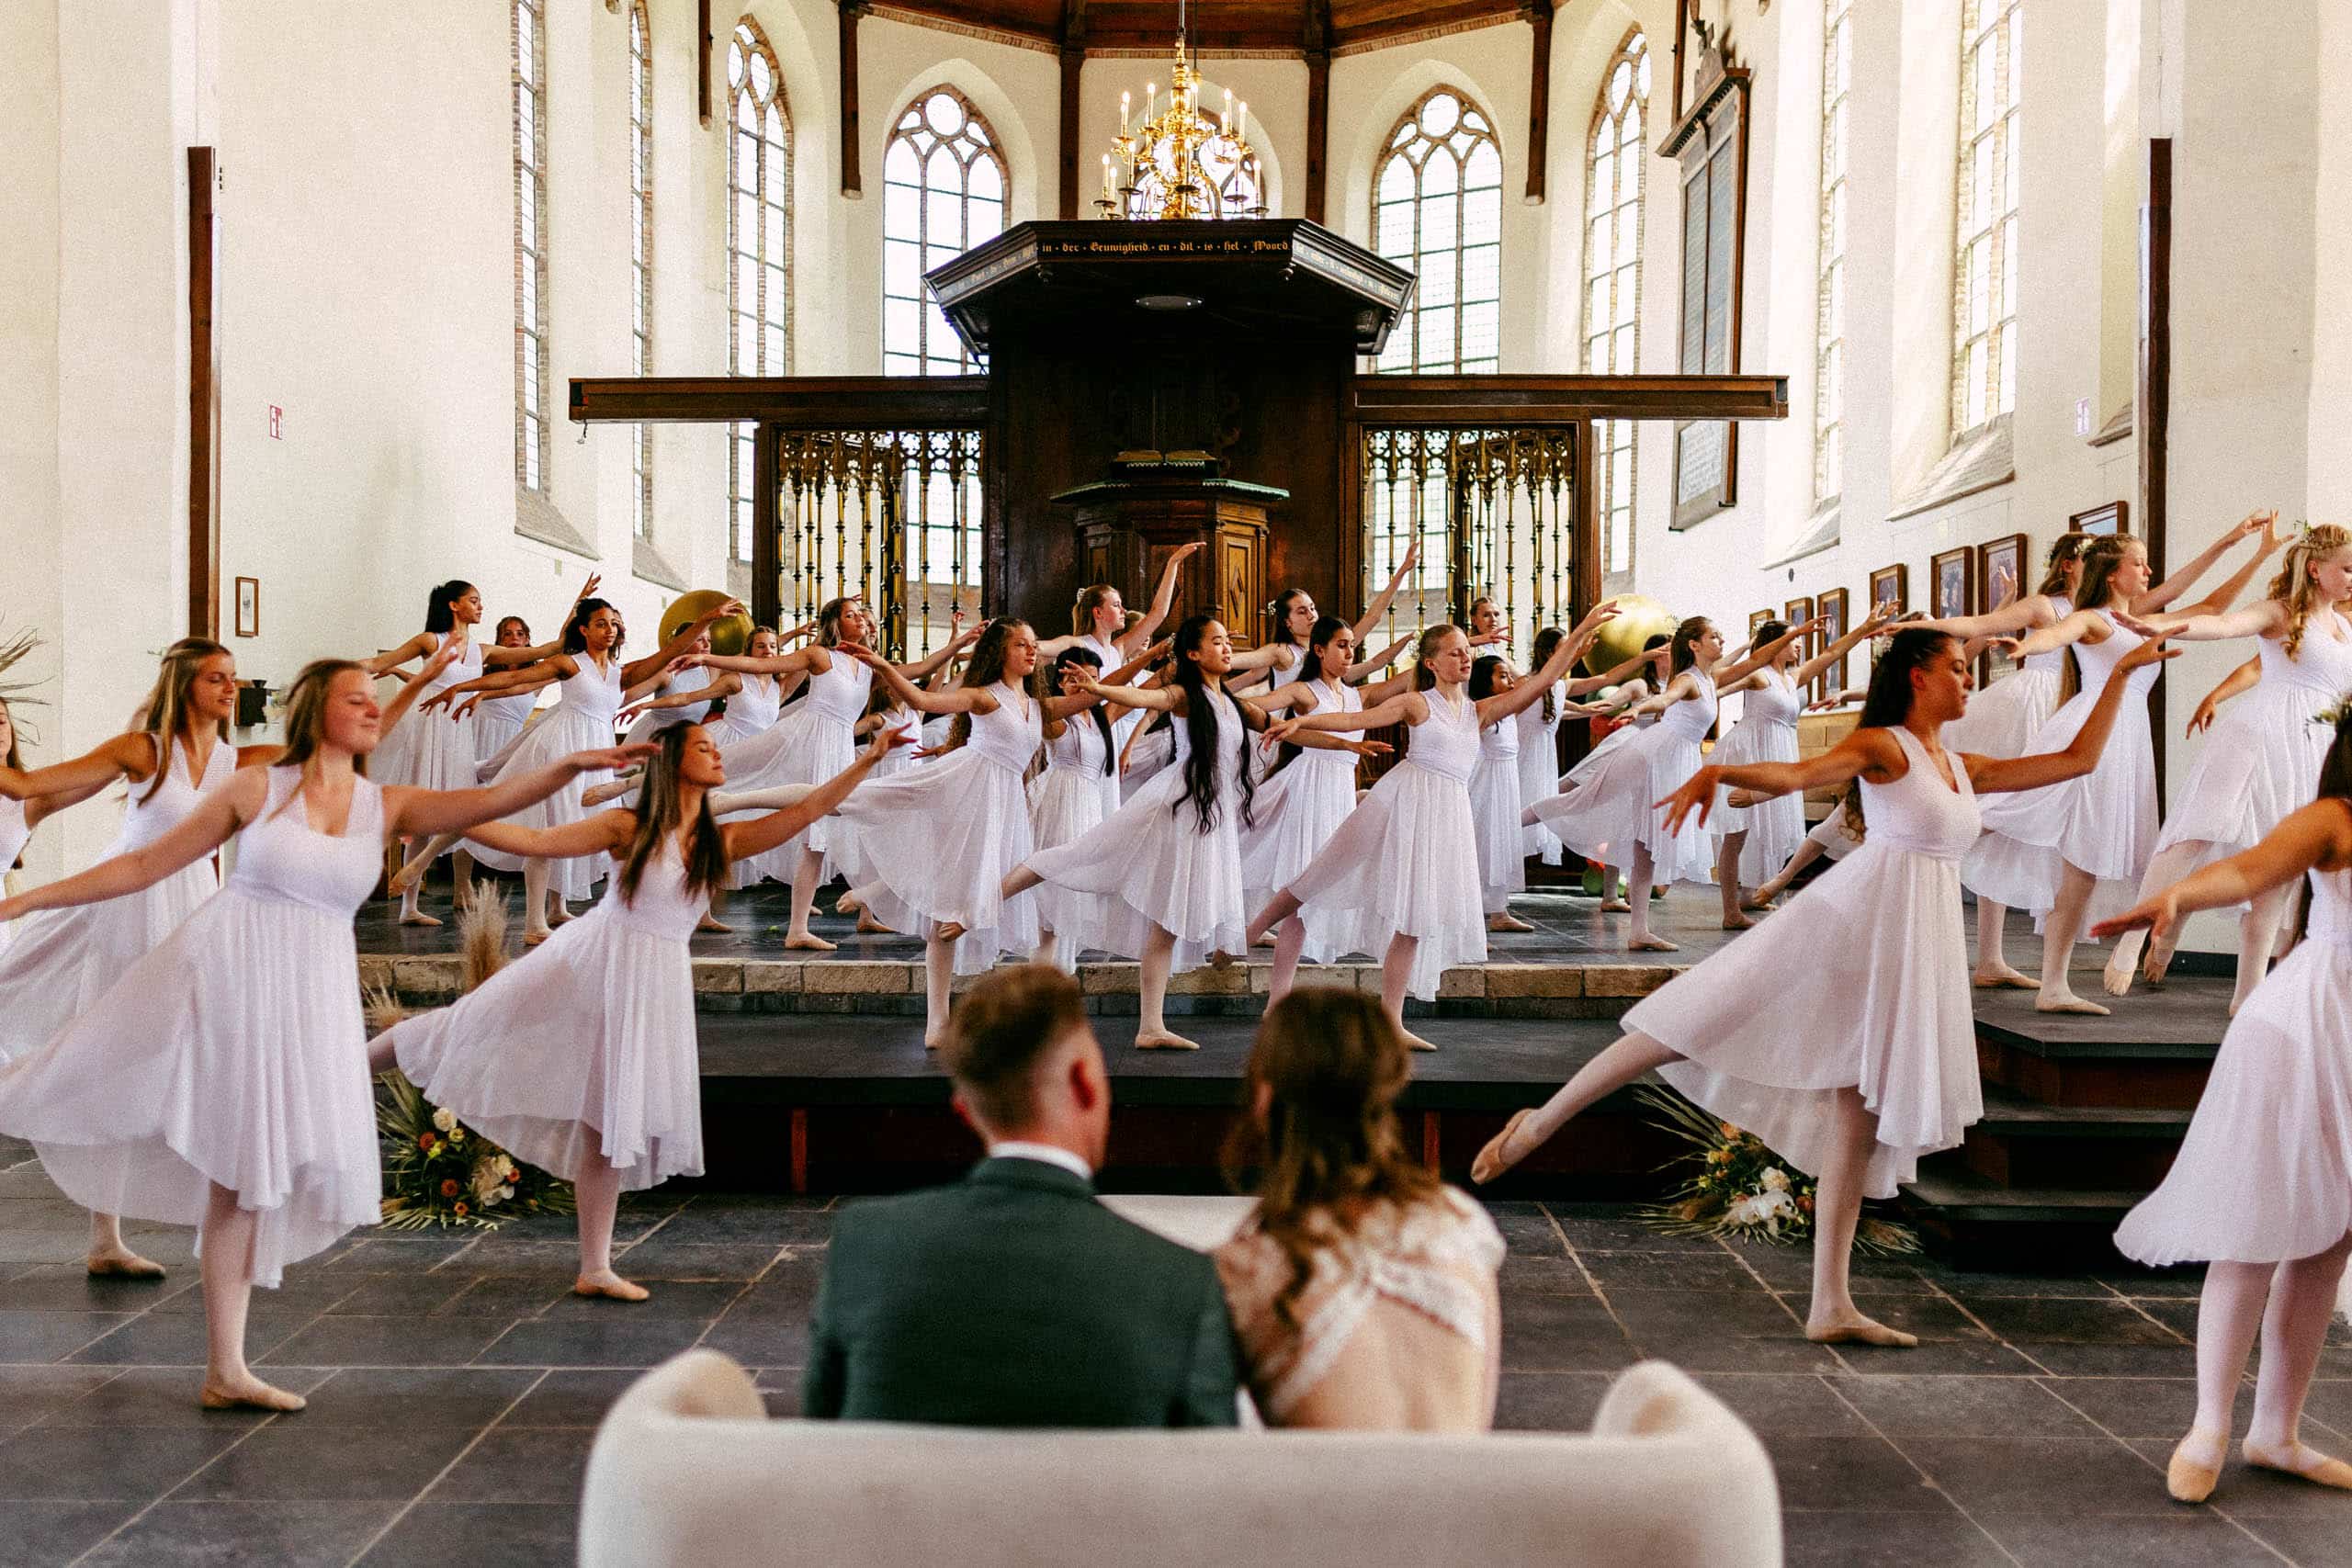 A group of dancers in white dresses perform in a church.